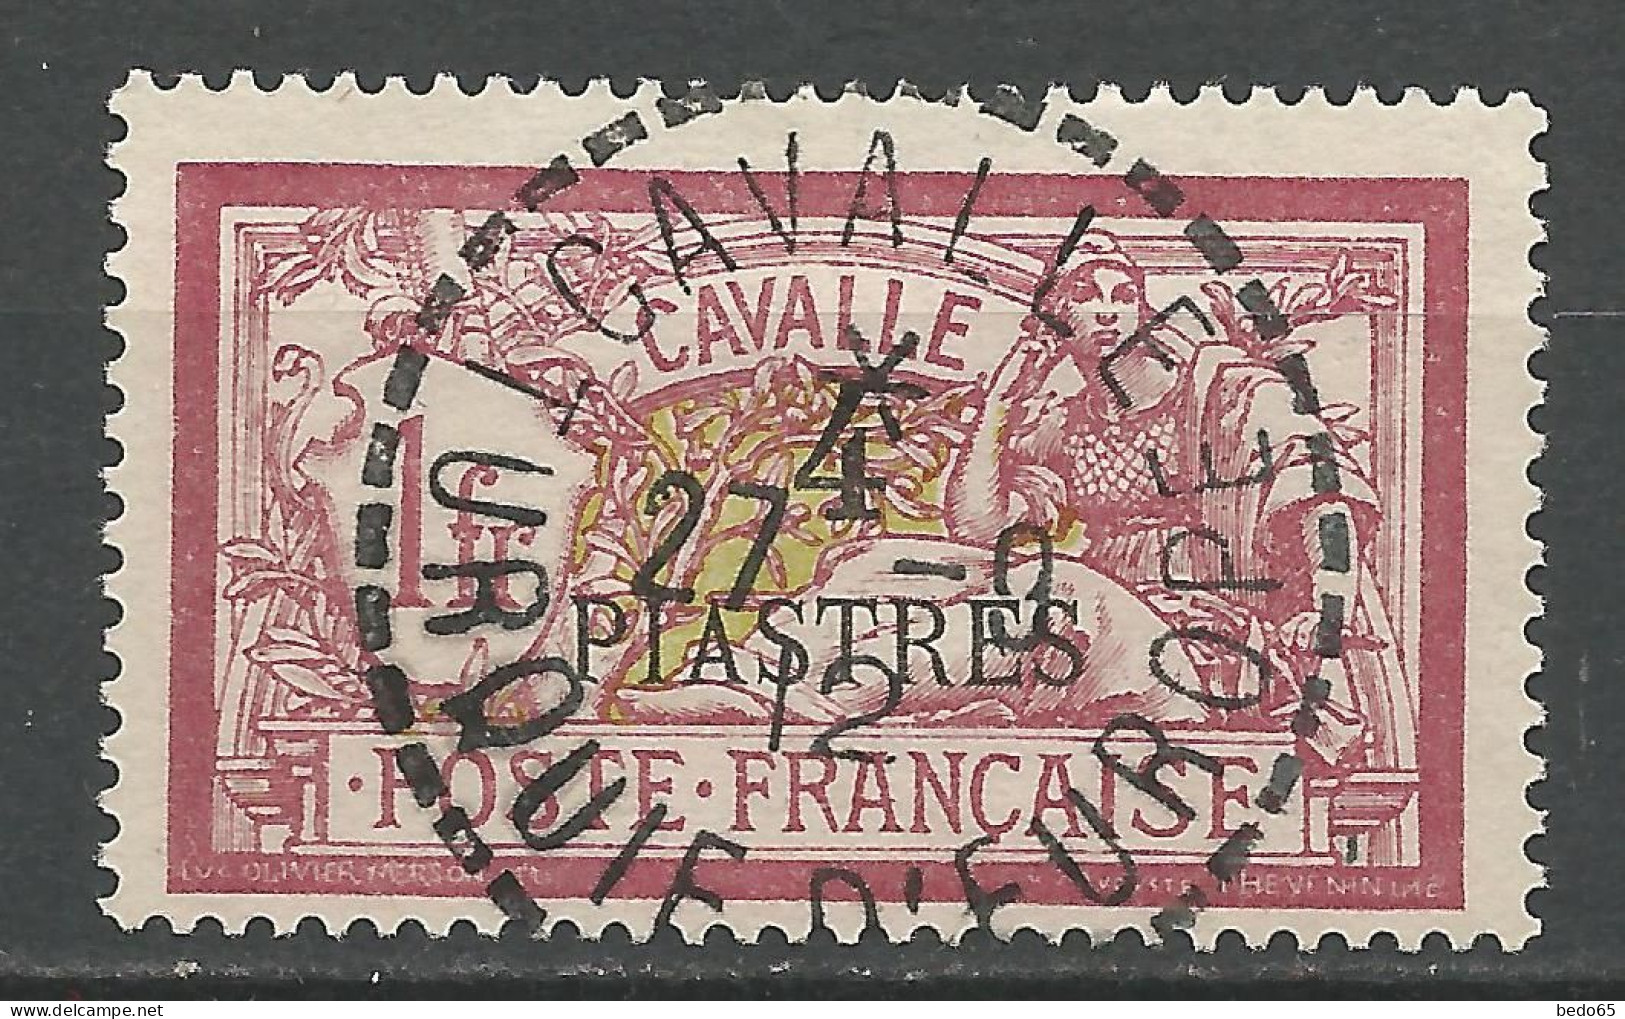 CAVALLE N° 15 CACHET CAVALLE TURQUIE D'EUROPE / Used - Used Stamps